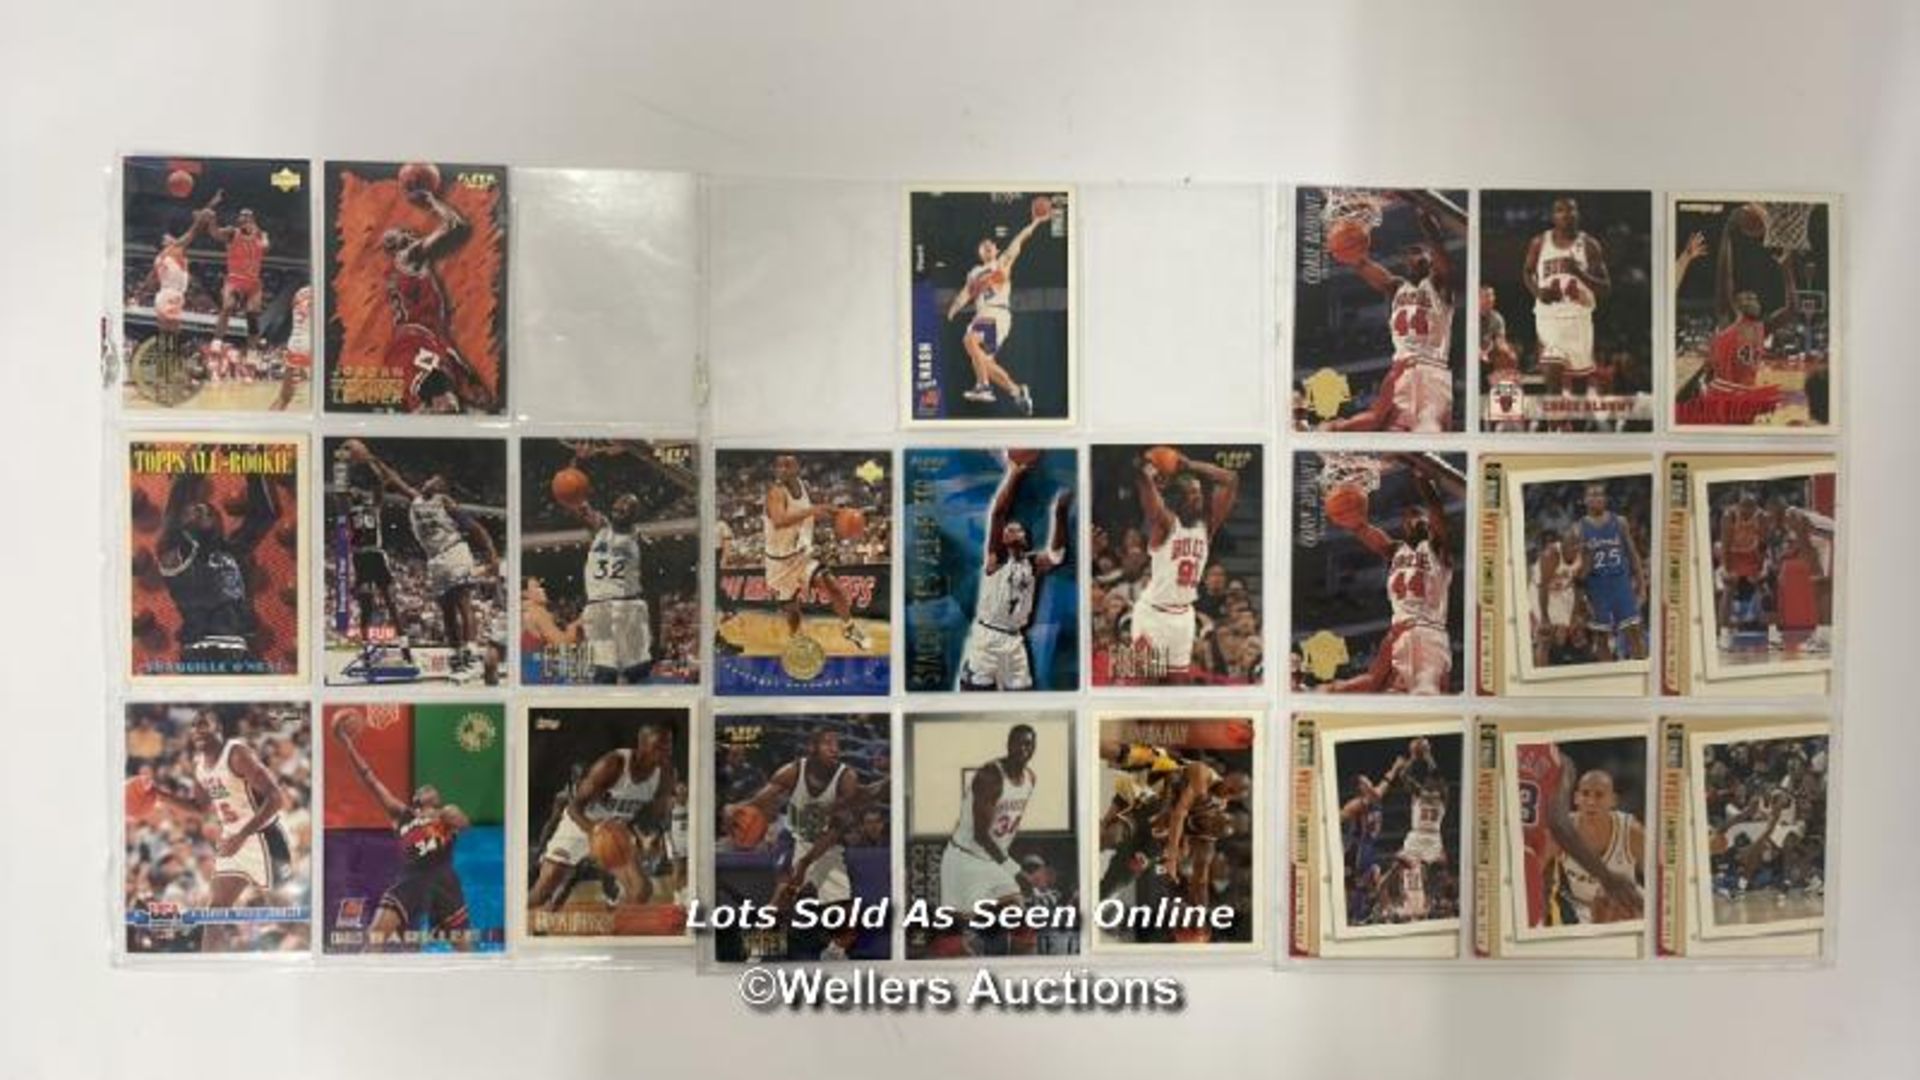 Basket Ball - 391 collectable basket ball cards by Topps Upper Deck and Skybox including Michael